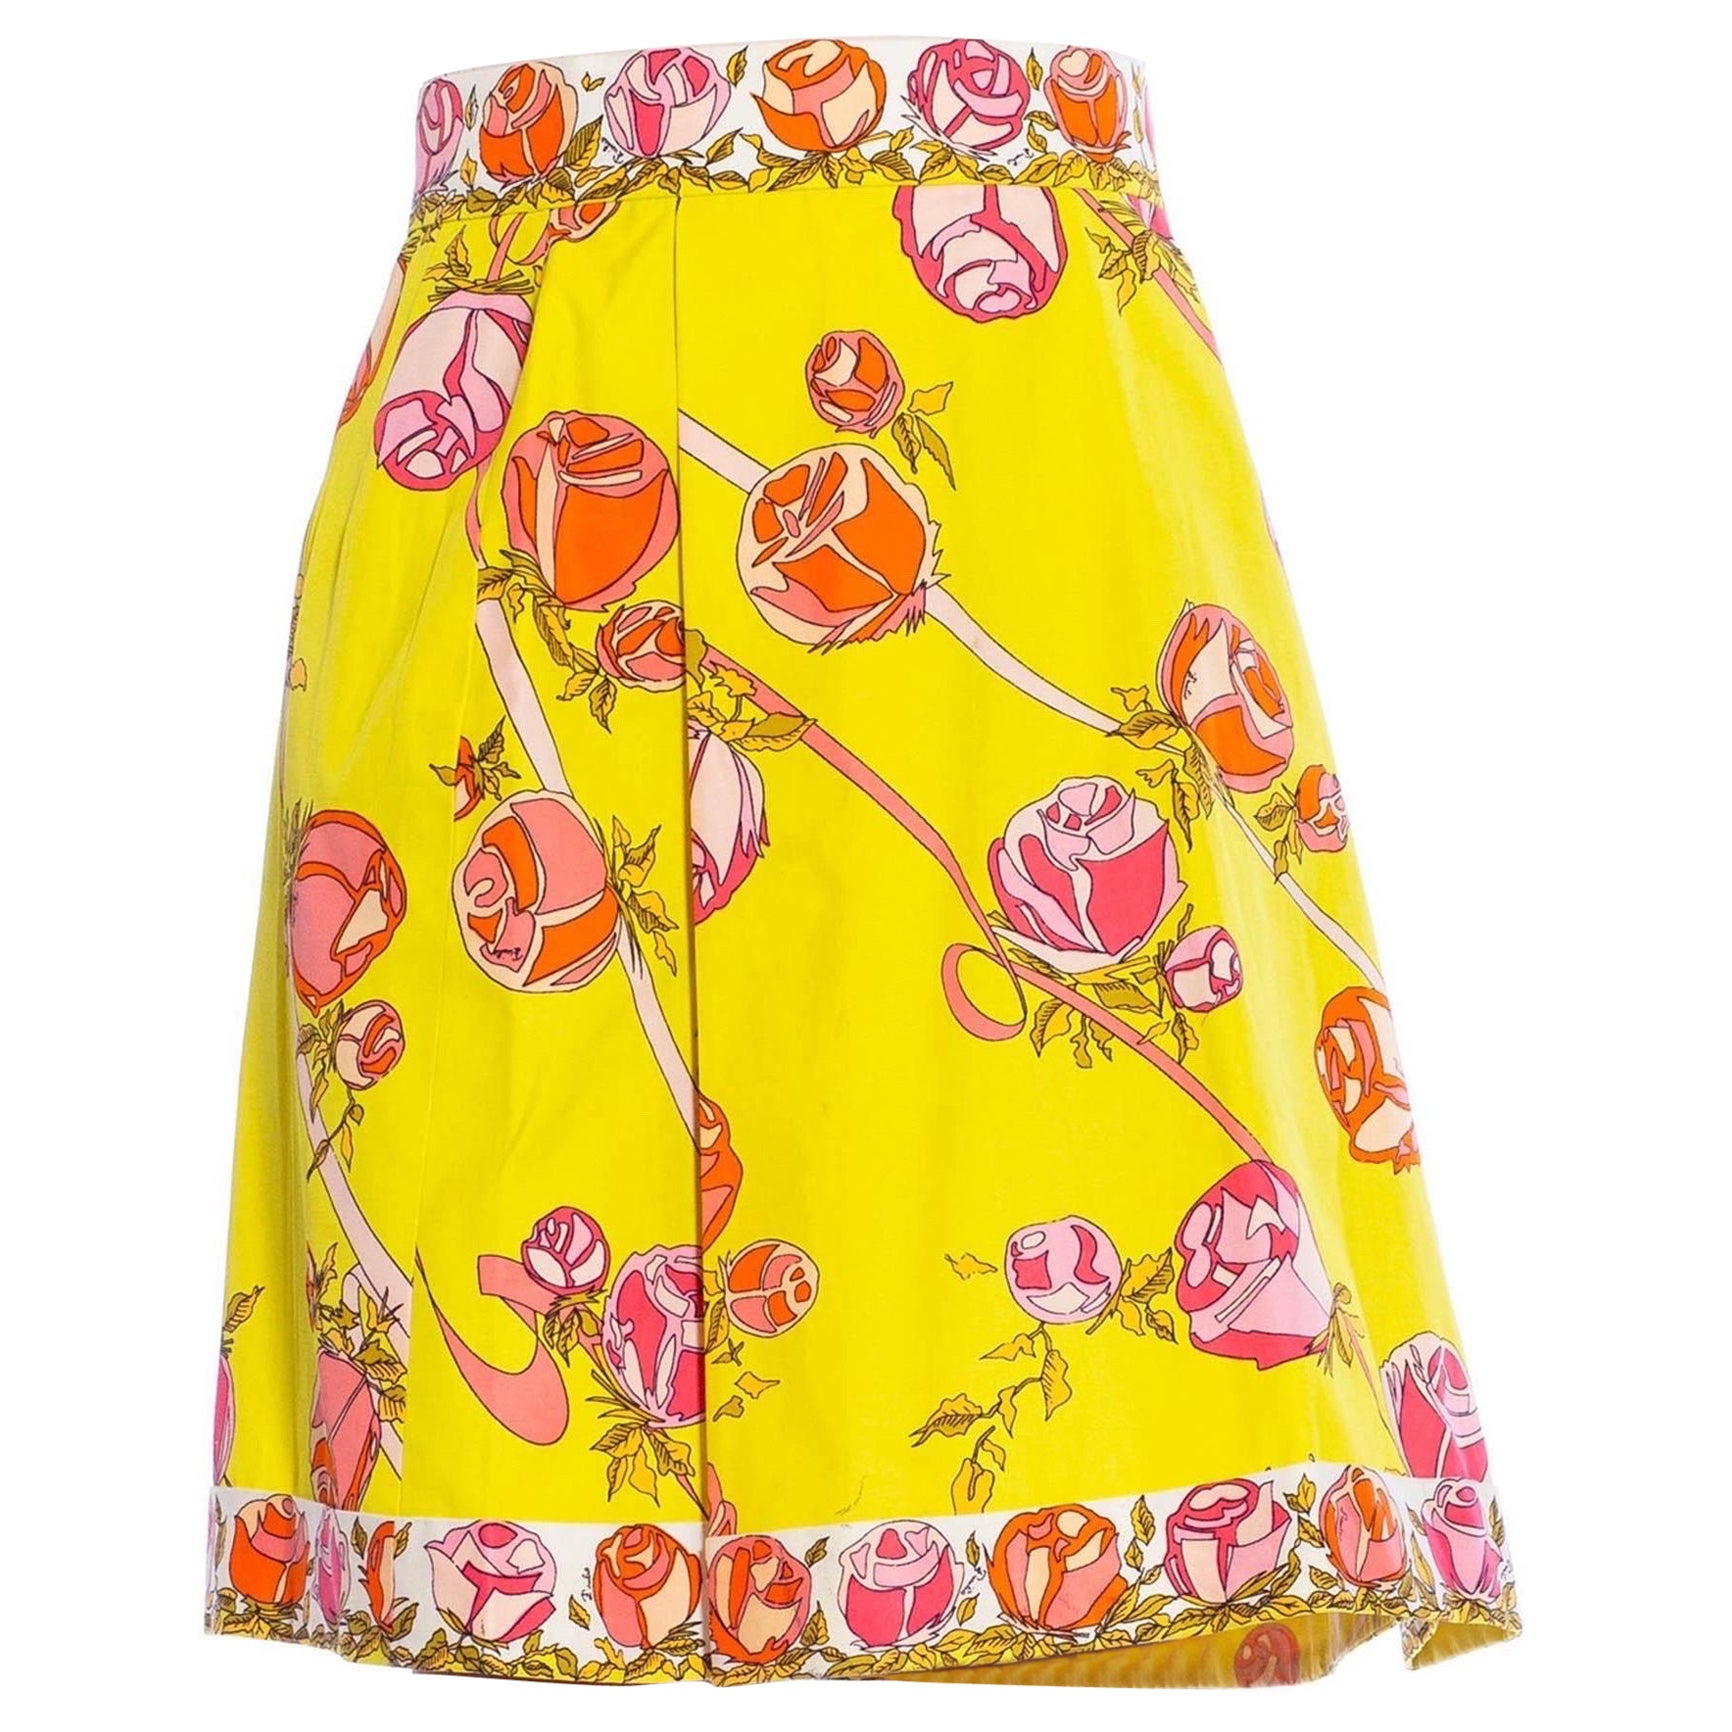 cheap and best Girls Casual Top Skirt Price in India - Buy cheap and best  Girls Casual Top Skirt online at Flipkart.com